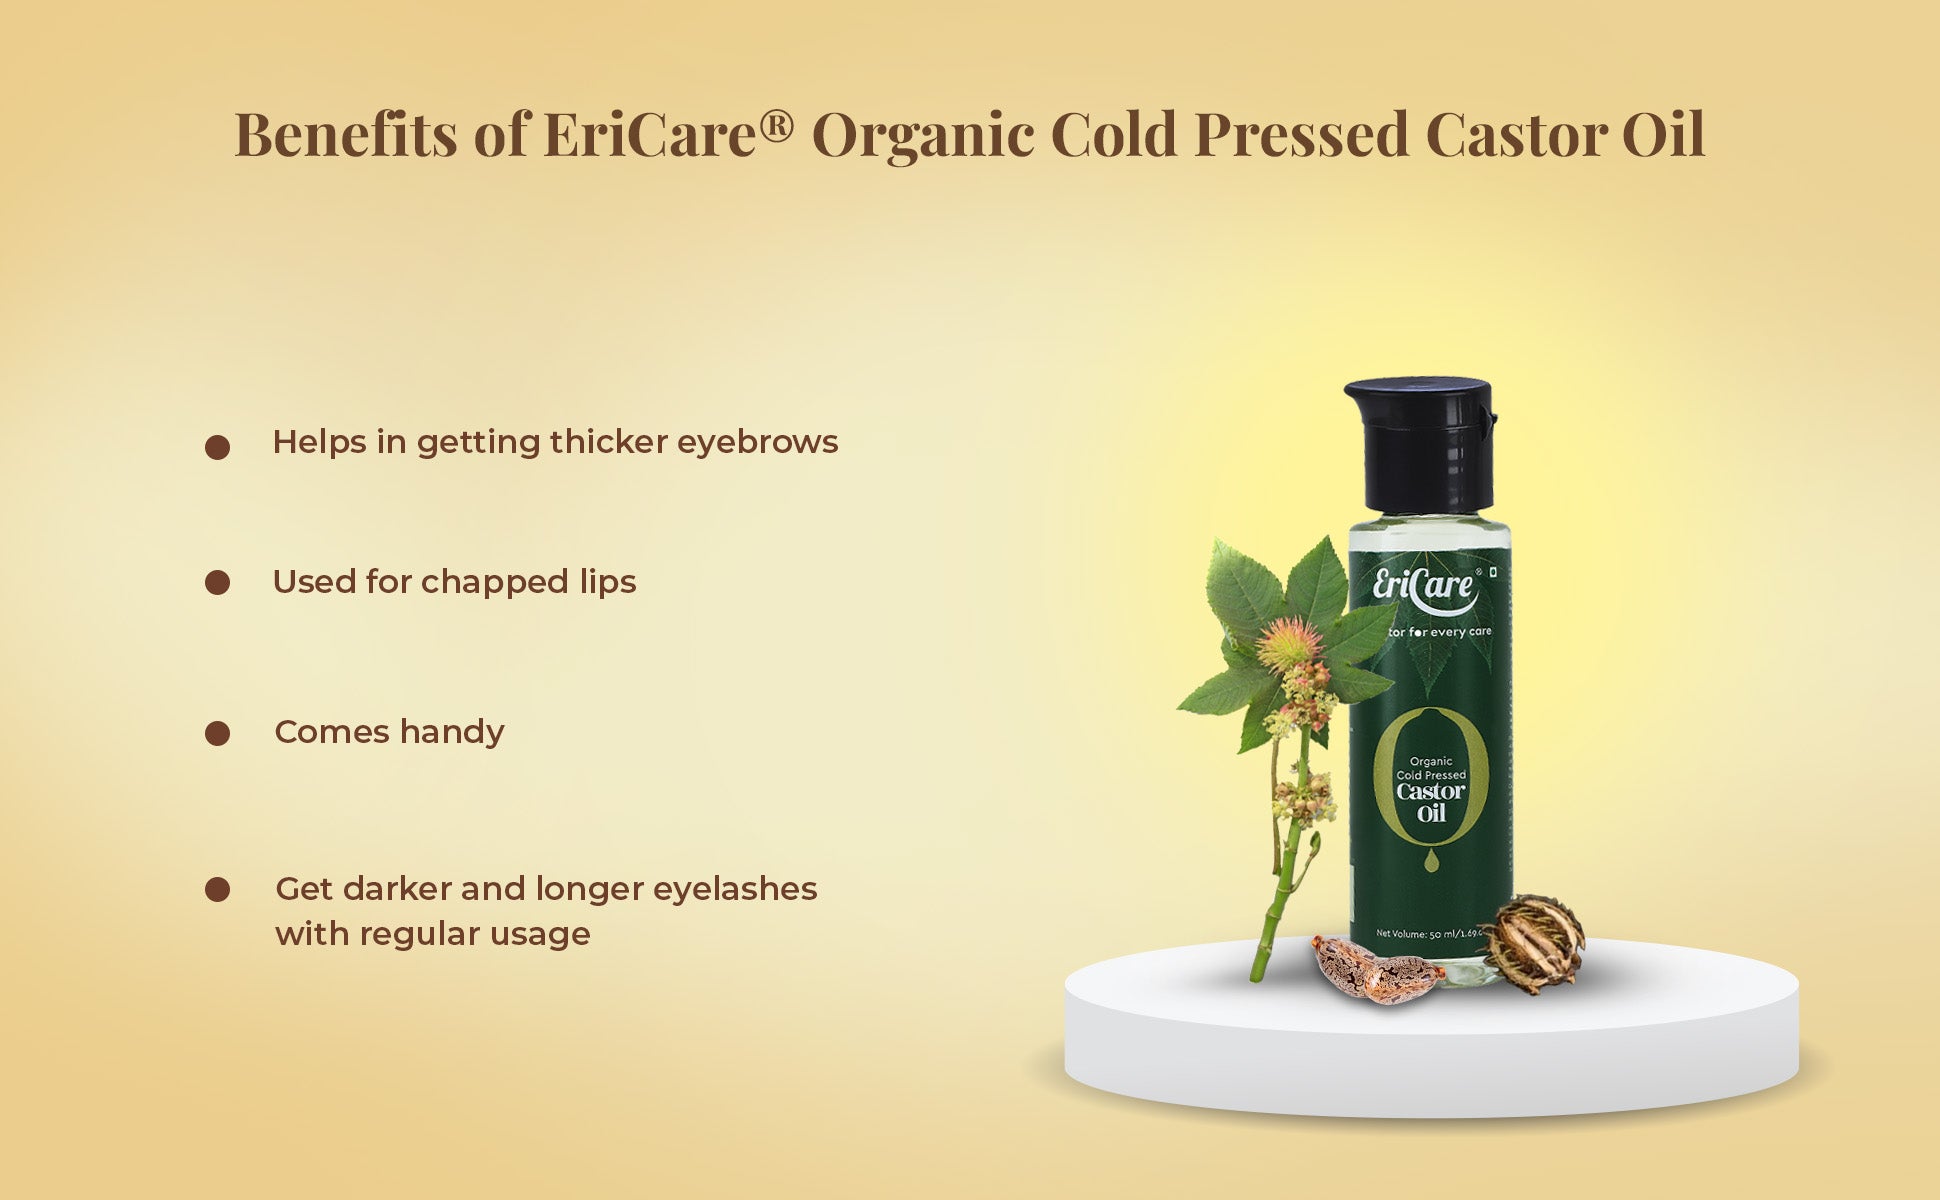 Image displaying advantages of using mini organic castor oil that comes handy for eyelashes and eyebrows growth